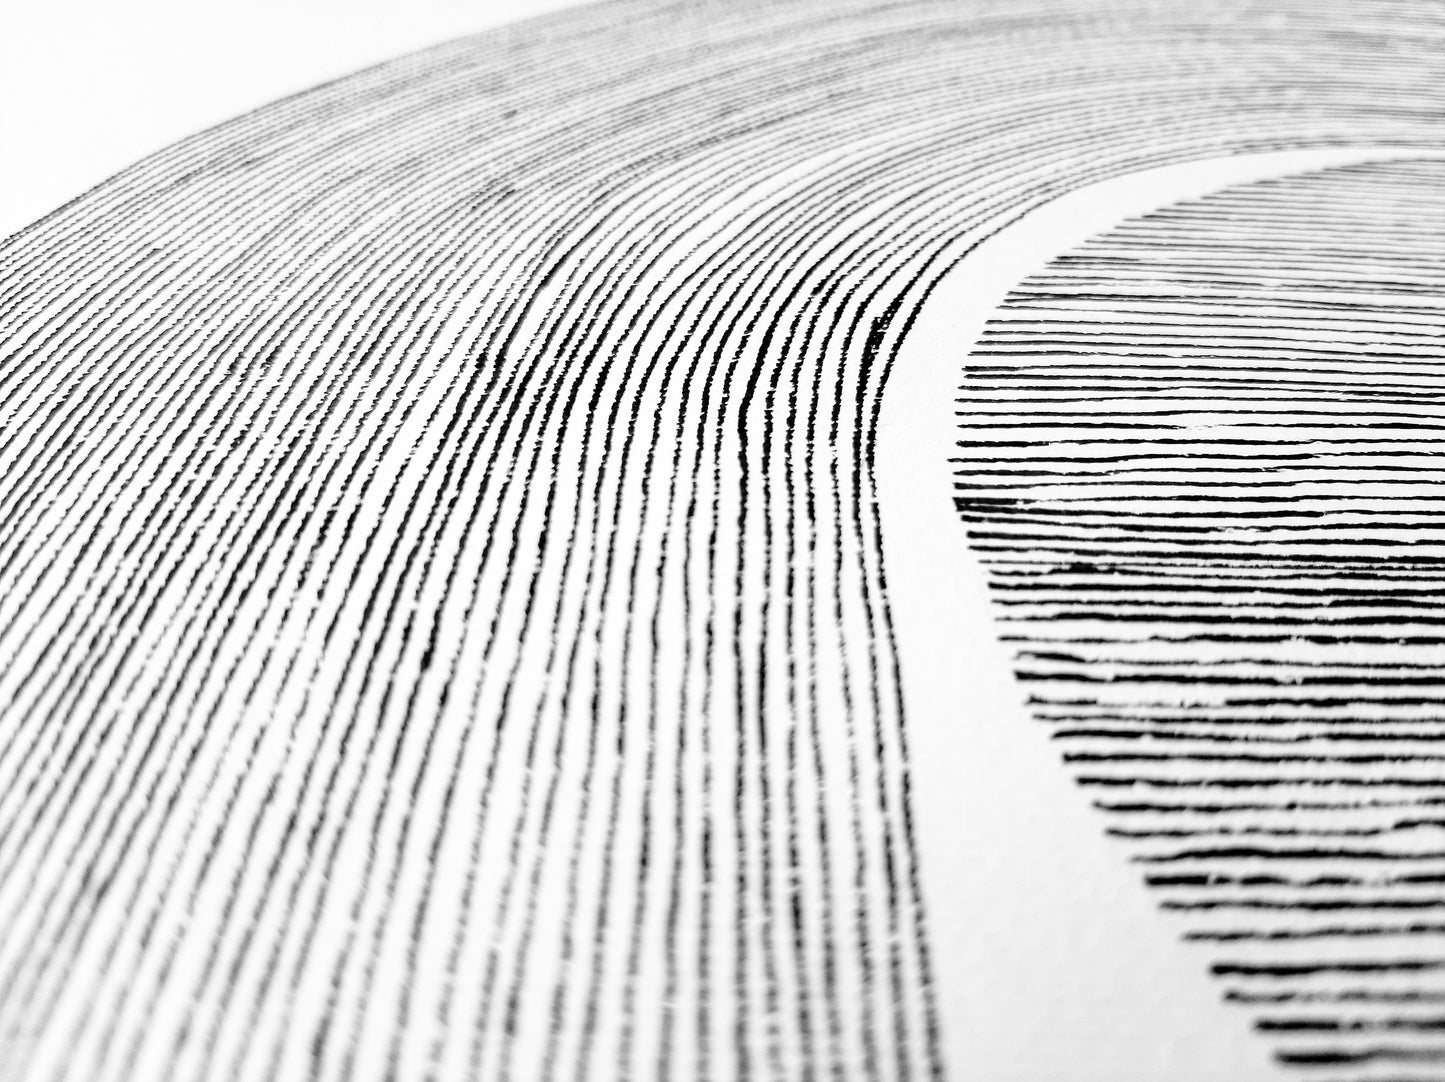 Details №3 Unique black and white Geometric abstract line drawing shapes artwork 